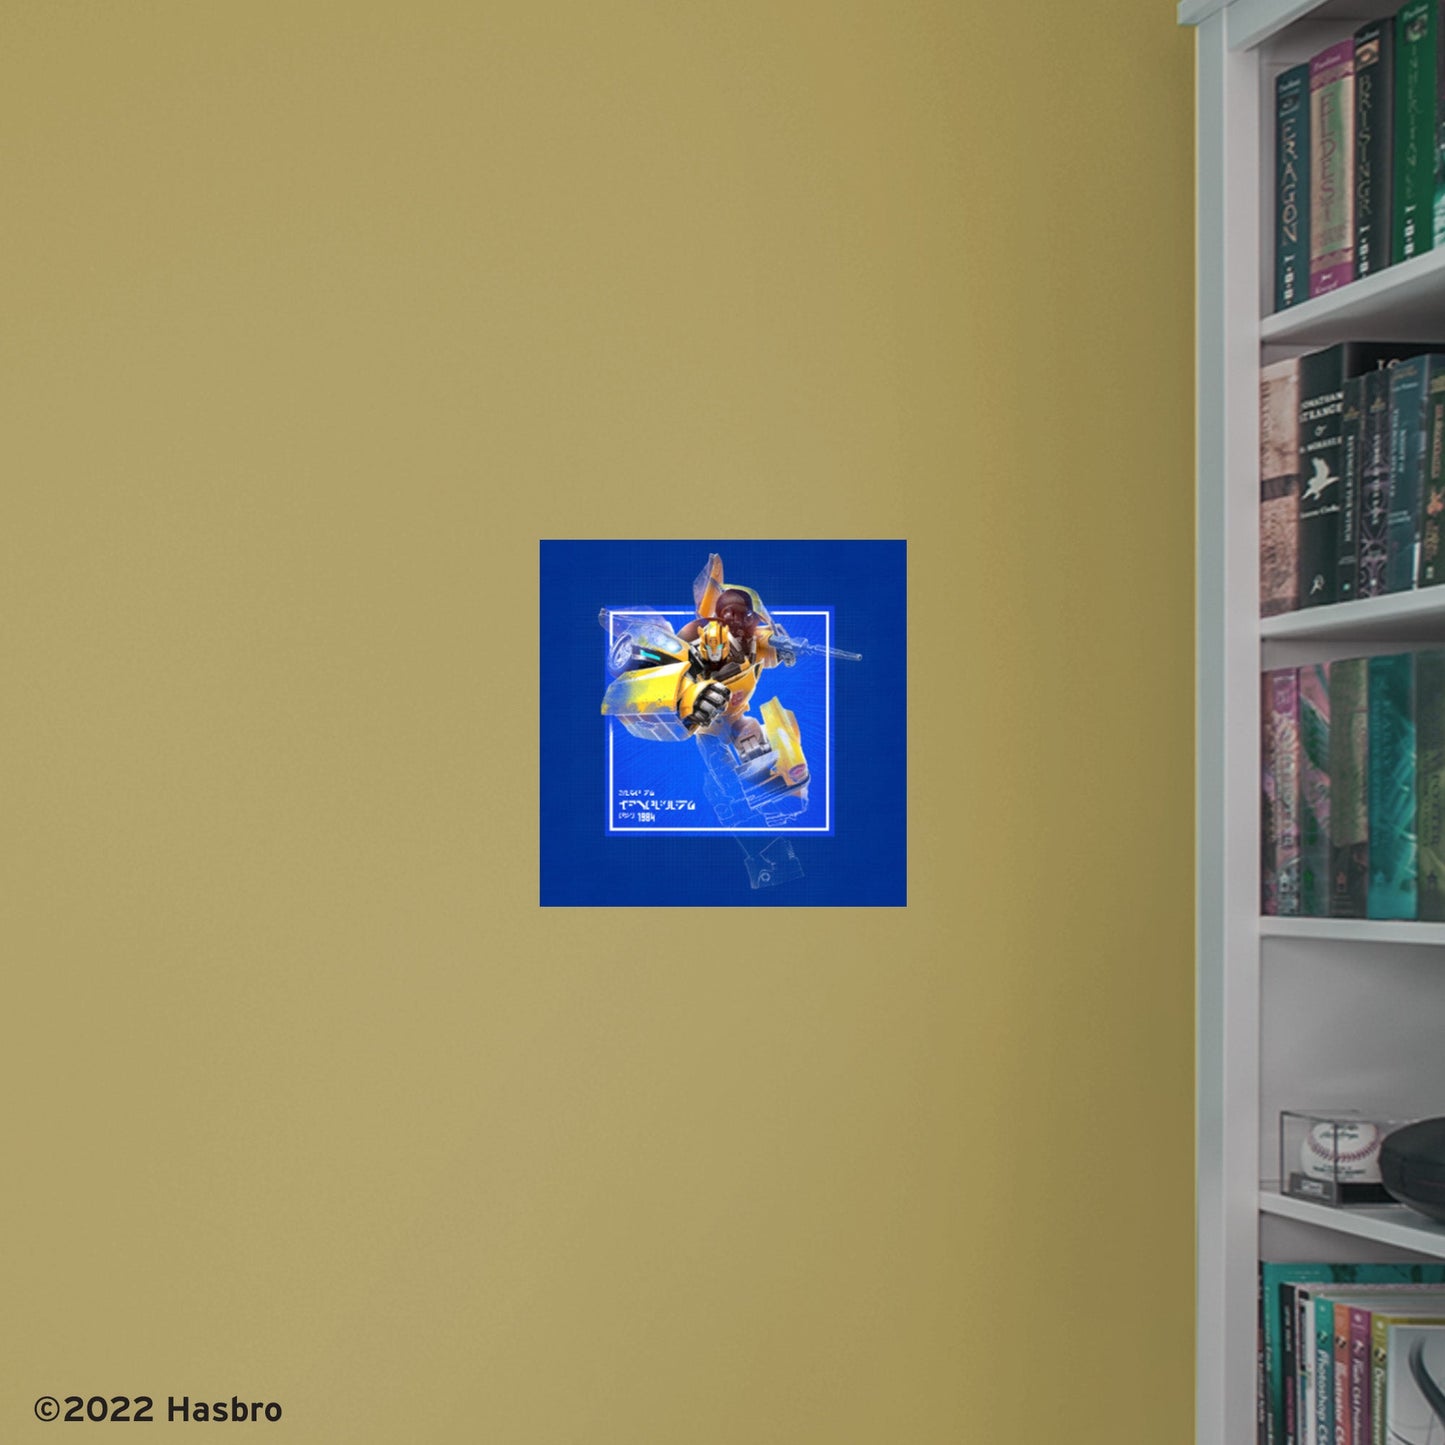 Transformers: Bumblebee Cybertronian Poster - Officially Licensed Hasbro Removable Adhesive Decal